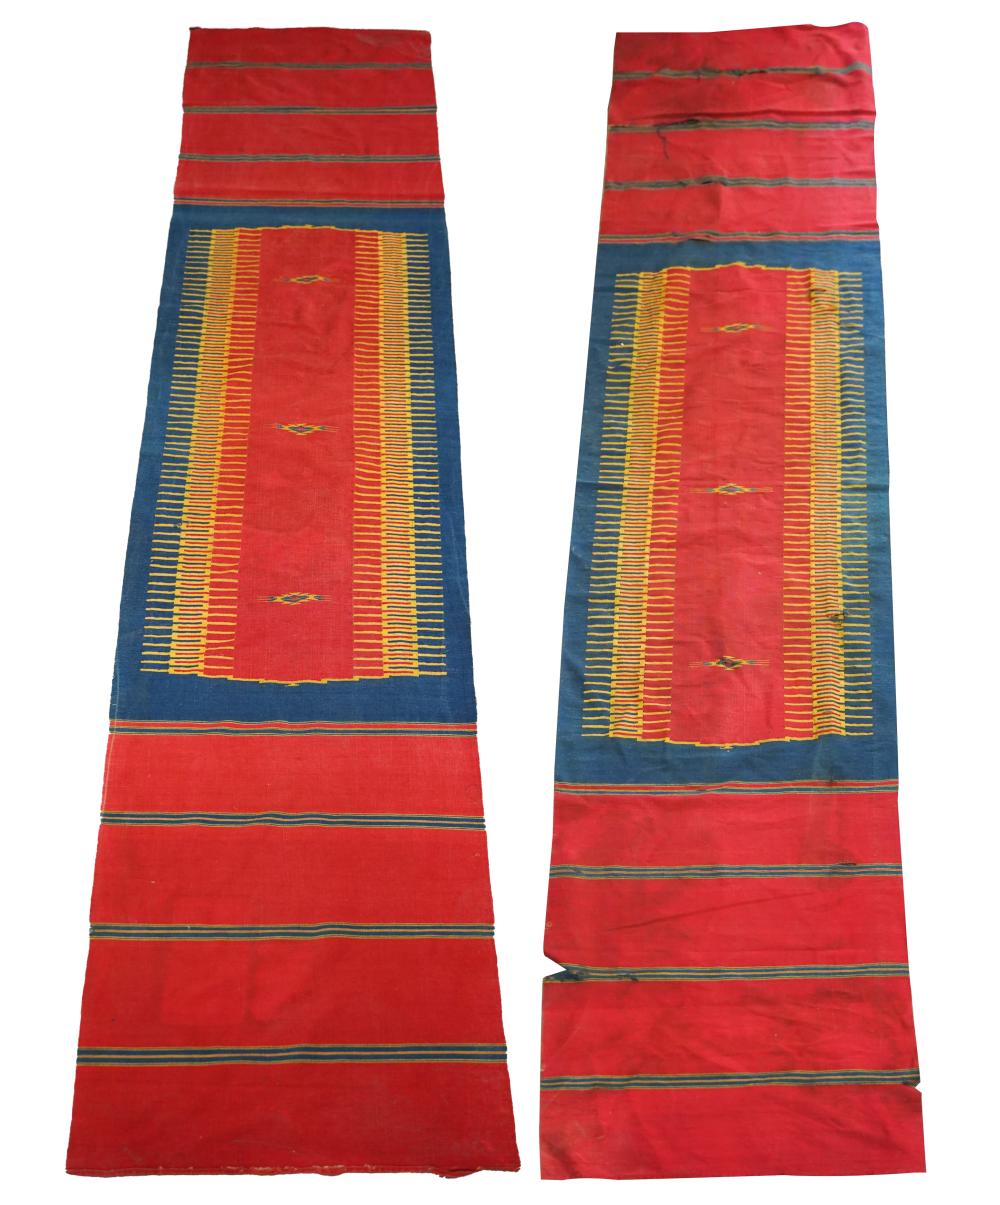 PAIR OF RED & BLUE KILIM RUNNERSCondition: